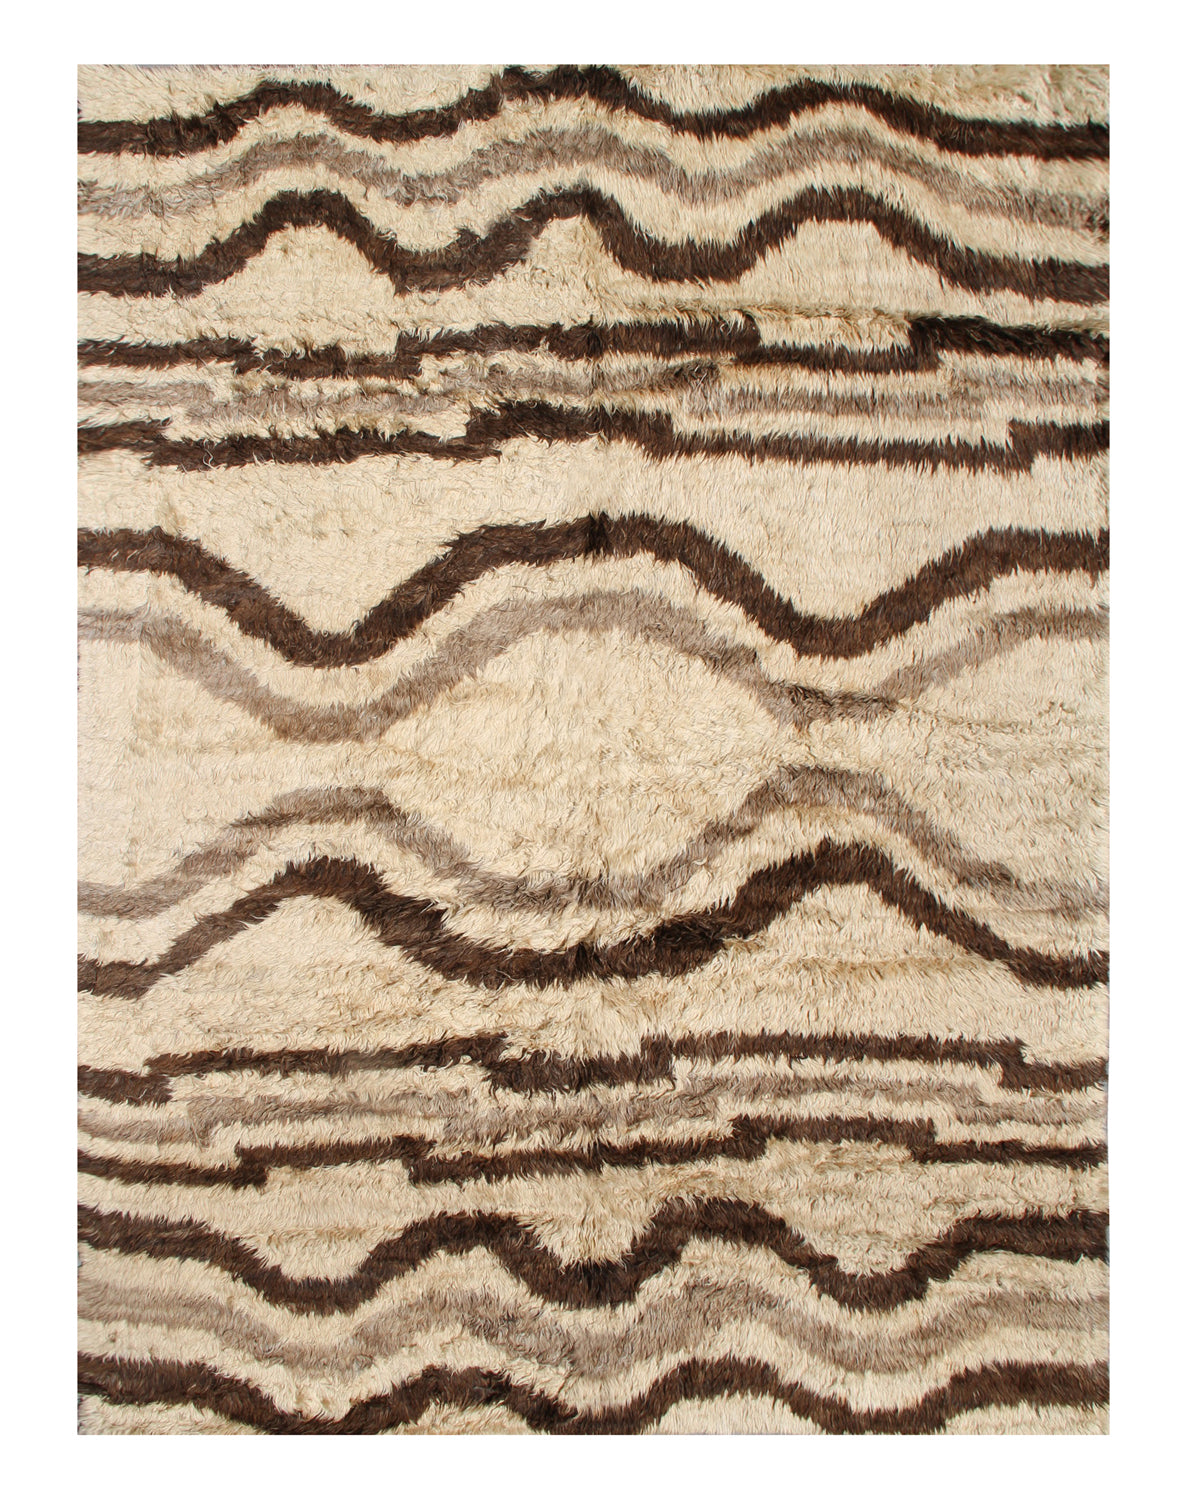 9'x12' Ariana Contemporary Moroccan Beige and Brown Barchi Shaggy Wool Area Rug